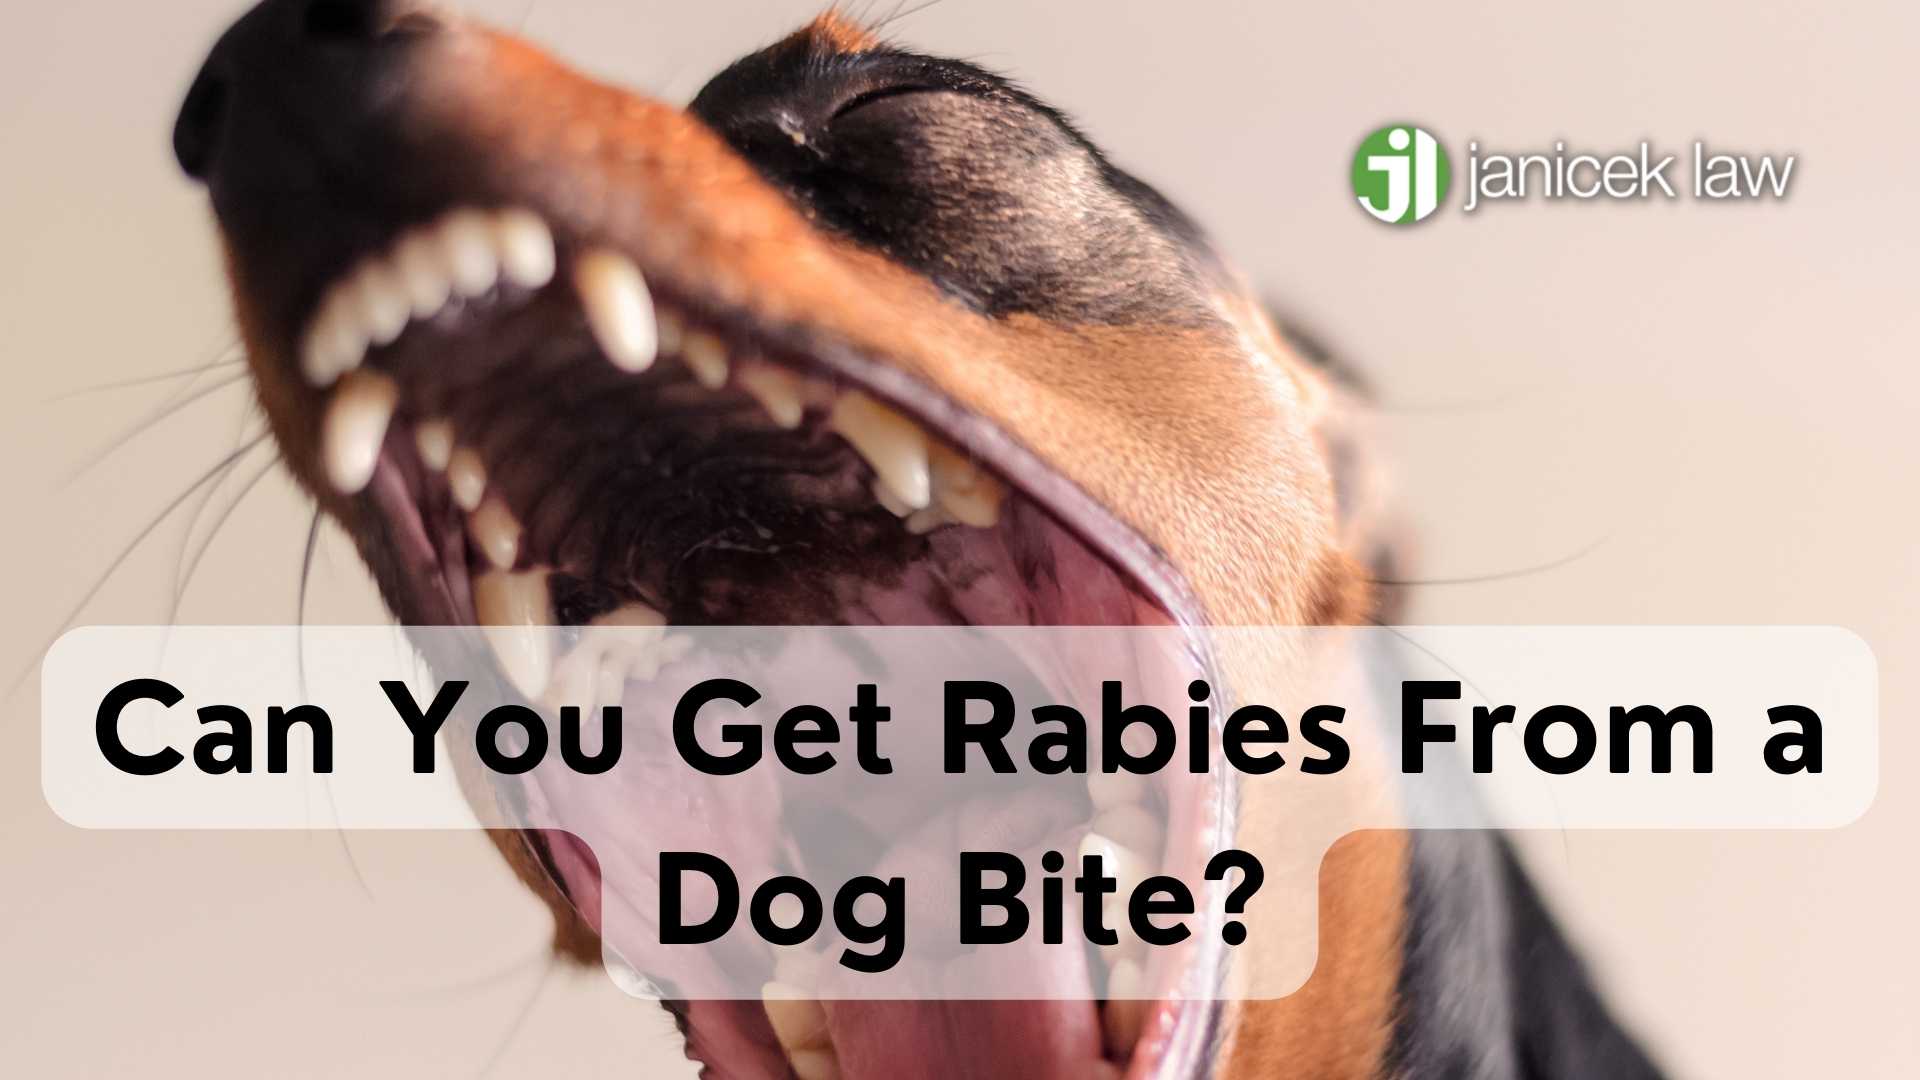 Can You Get Rabies from a Dog Bite